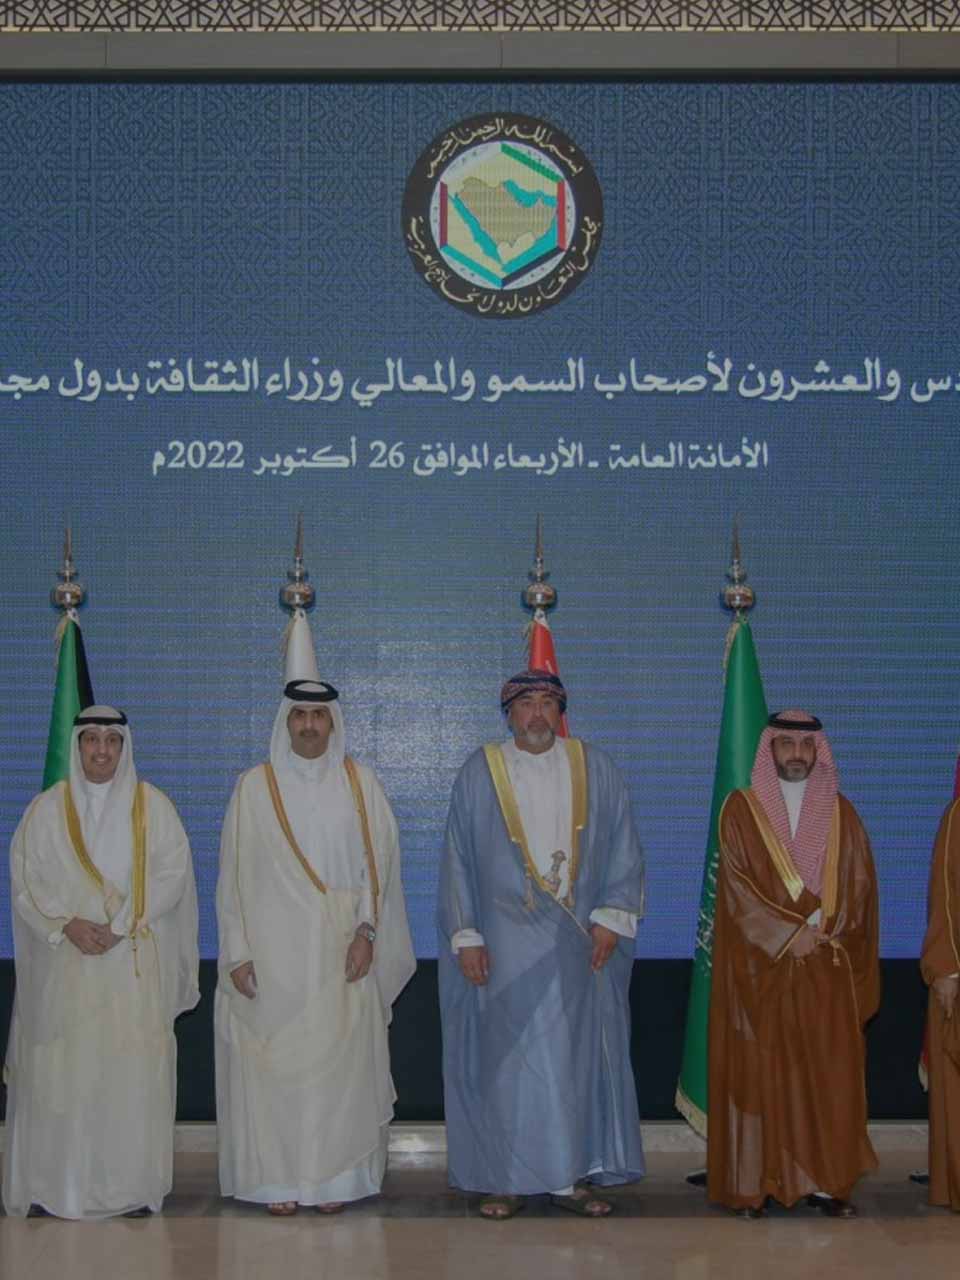 the 26th meeting in GCC